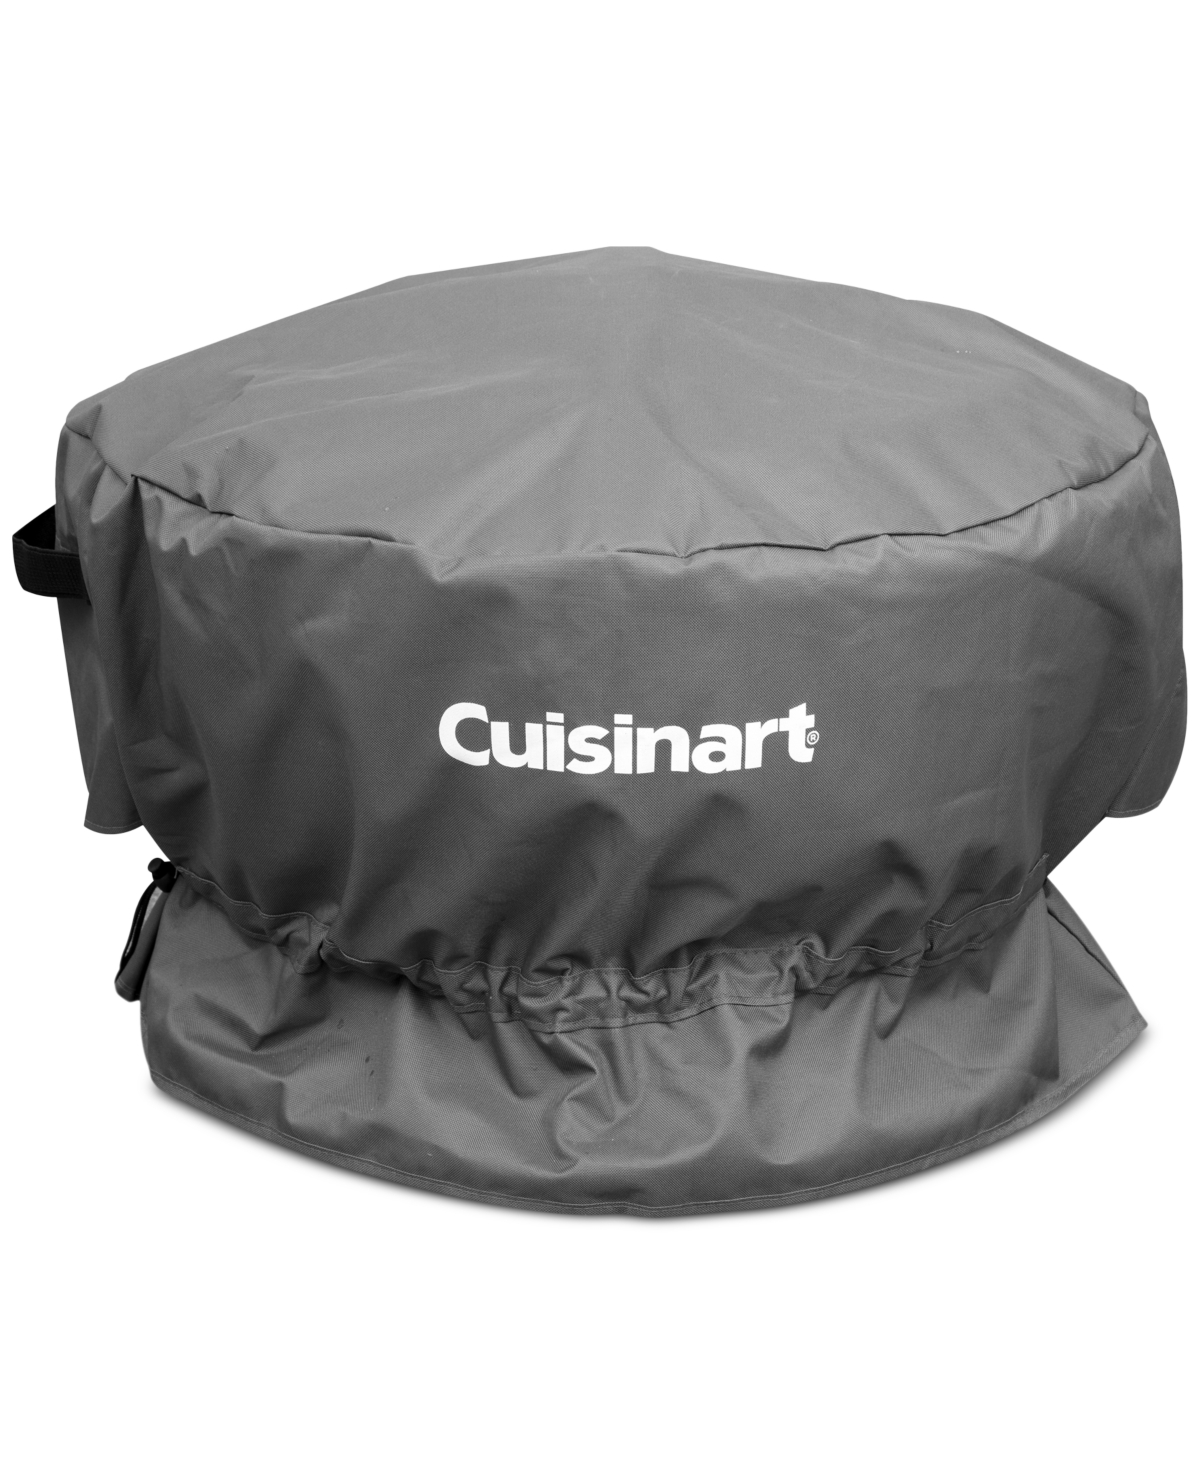 Cuisinart Cleanburn Weather-resistant Fire Pit Cover In Black